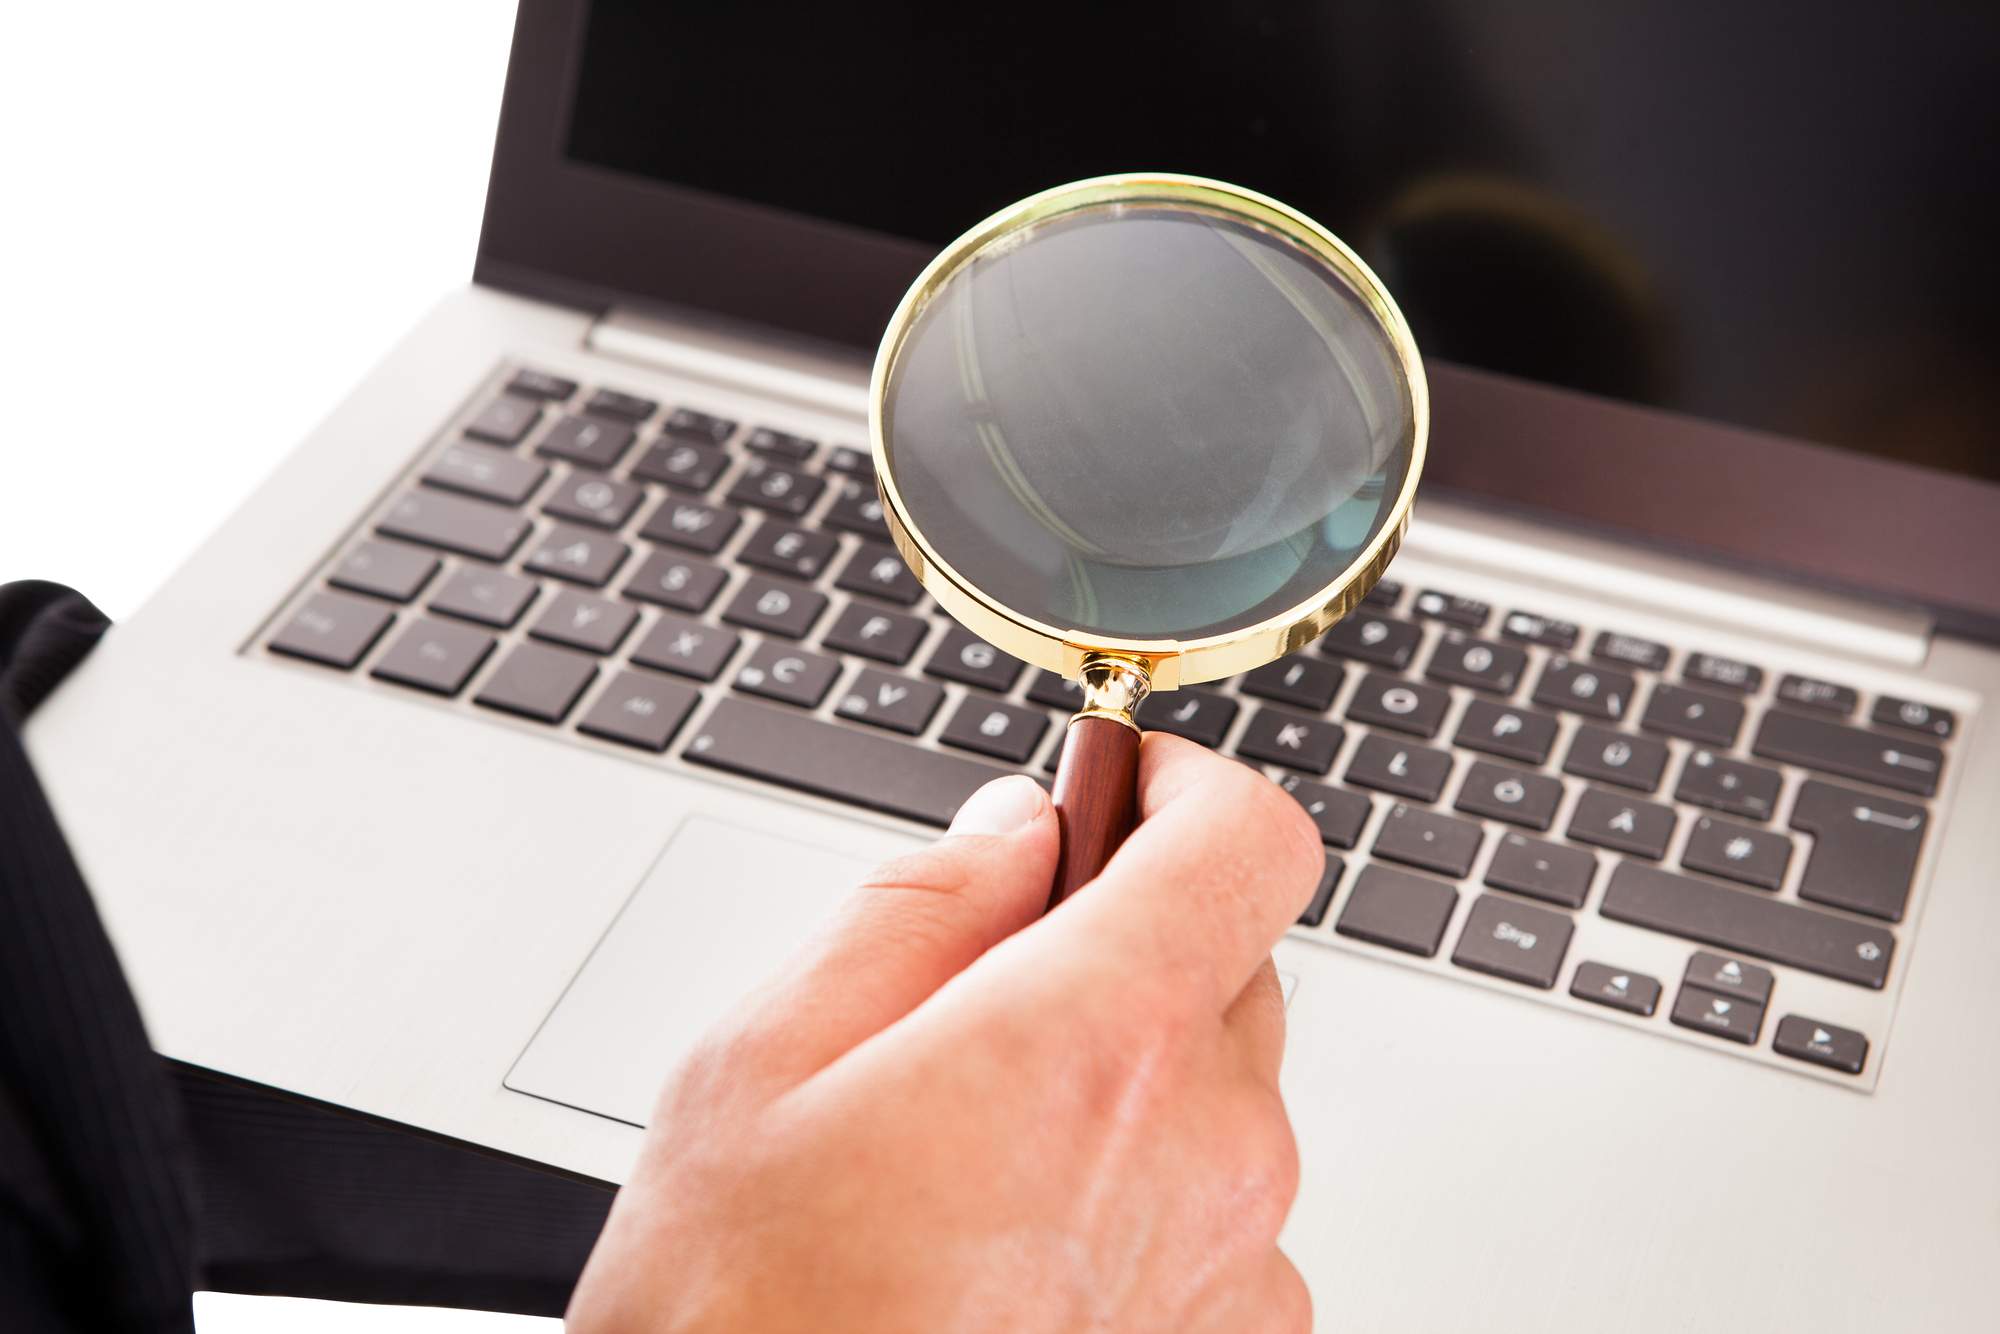 Magnifying glass and computer illustrating applications audits